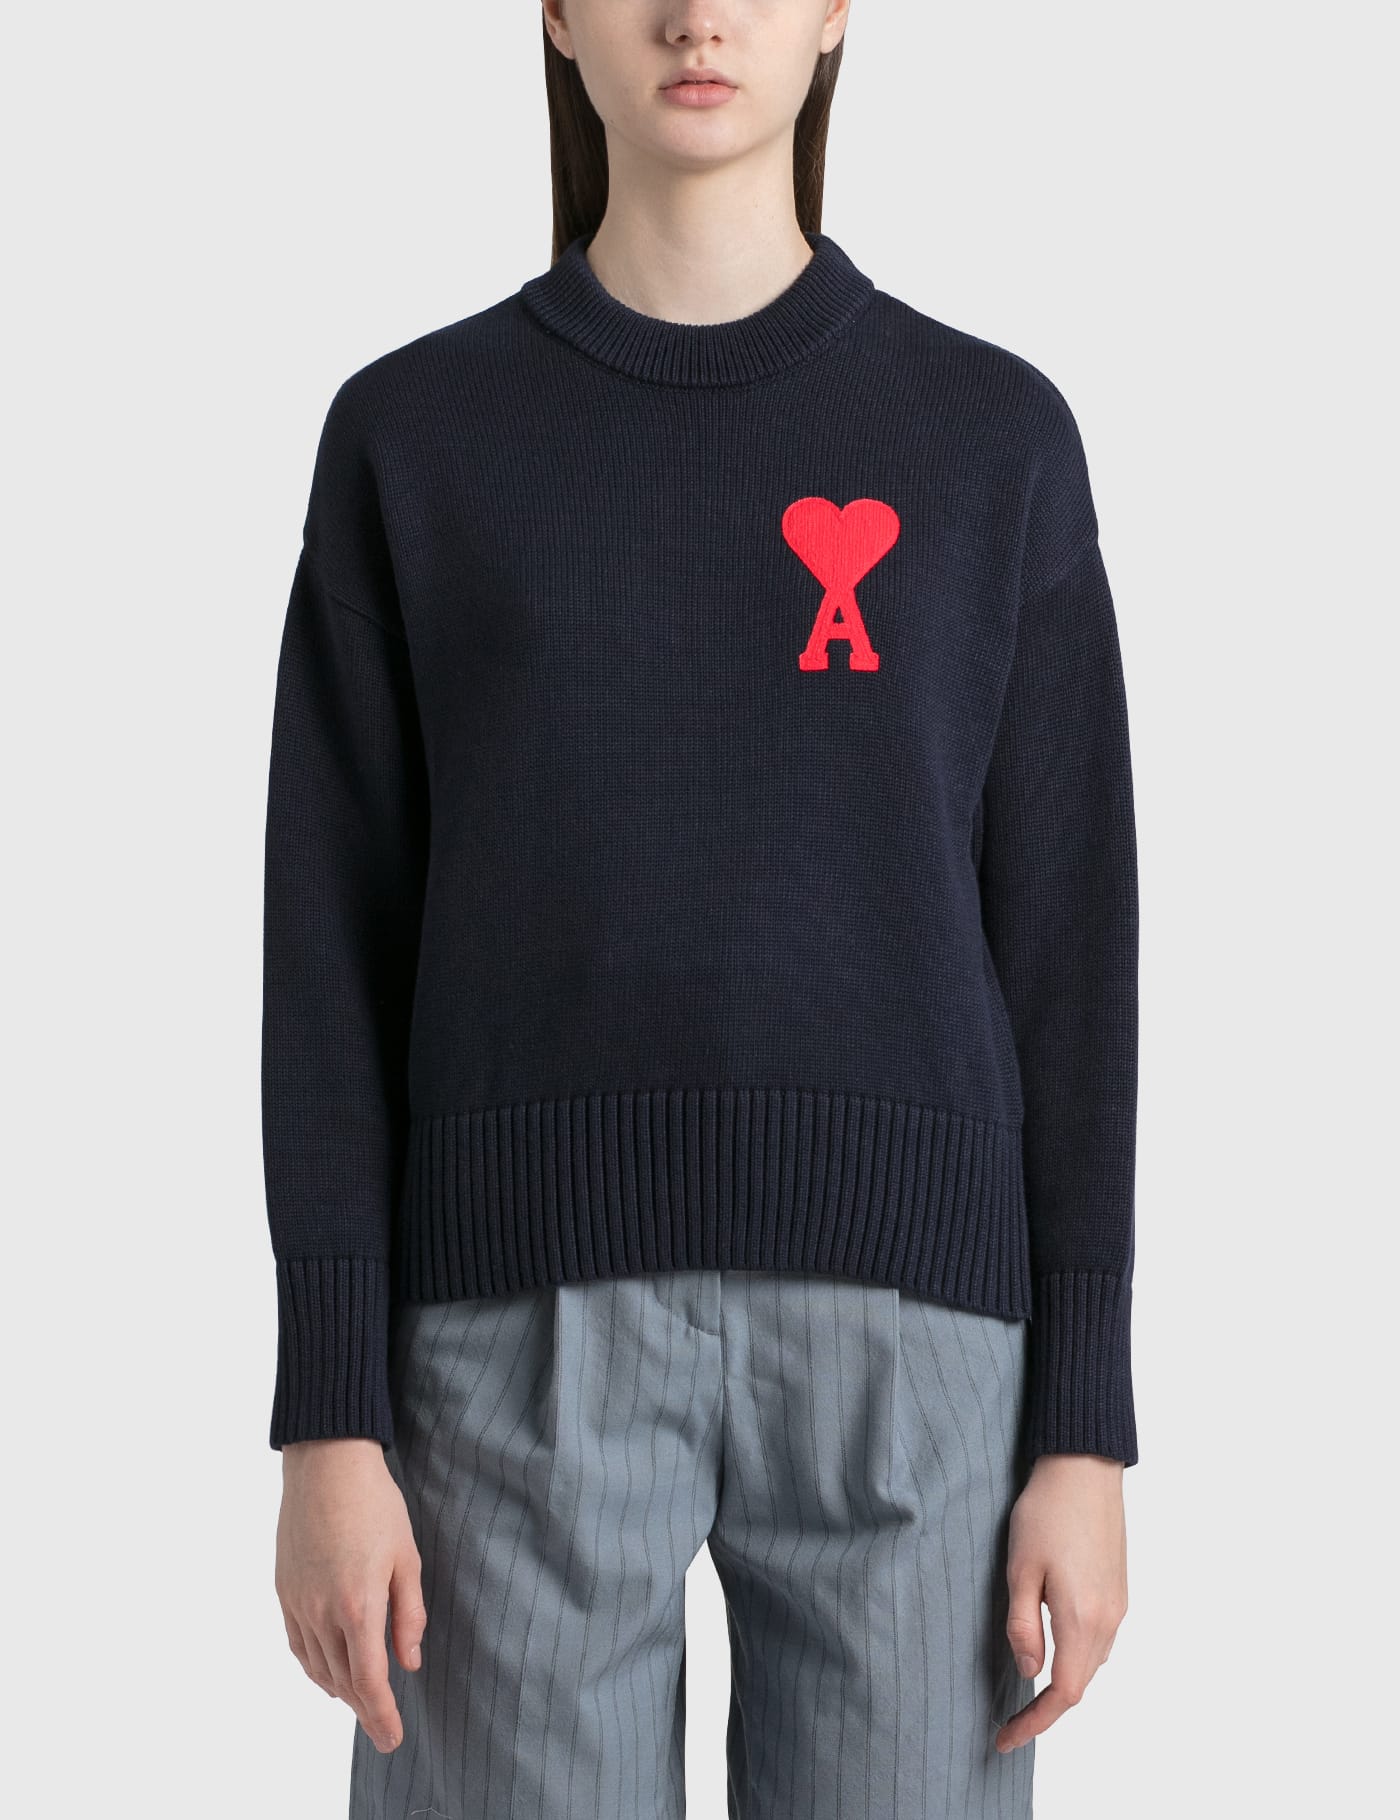 AMI Ami De Coeur Cashmere Jumper in Blue Womens Clothing Jumpers and knitwear Jumpers 